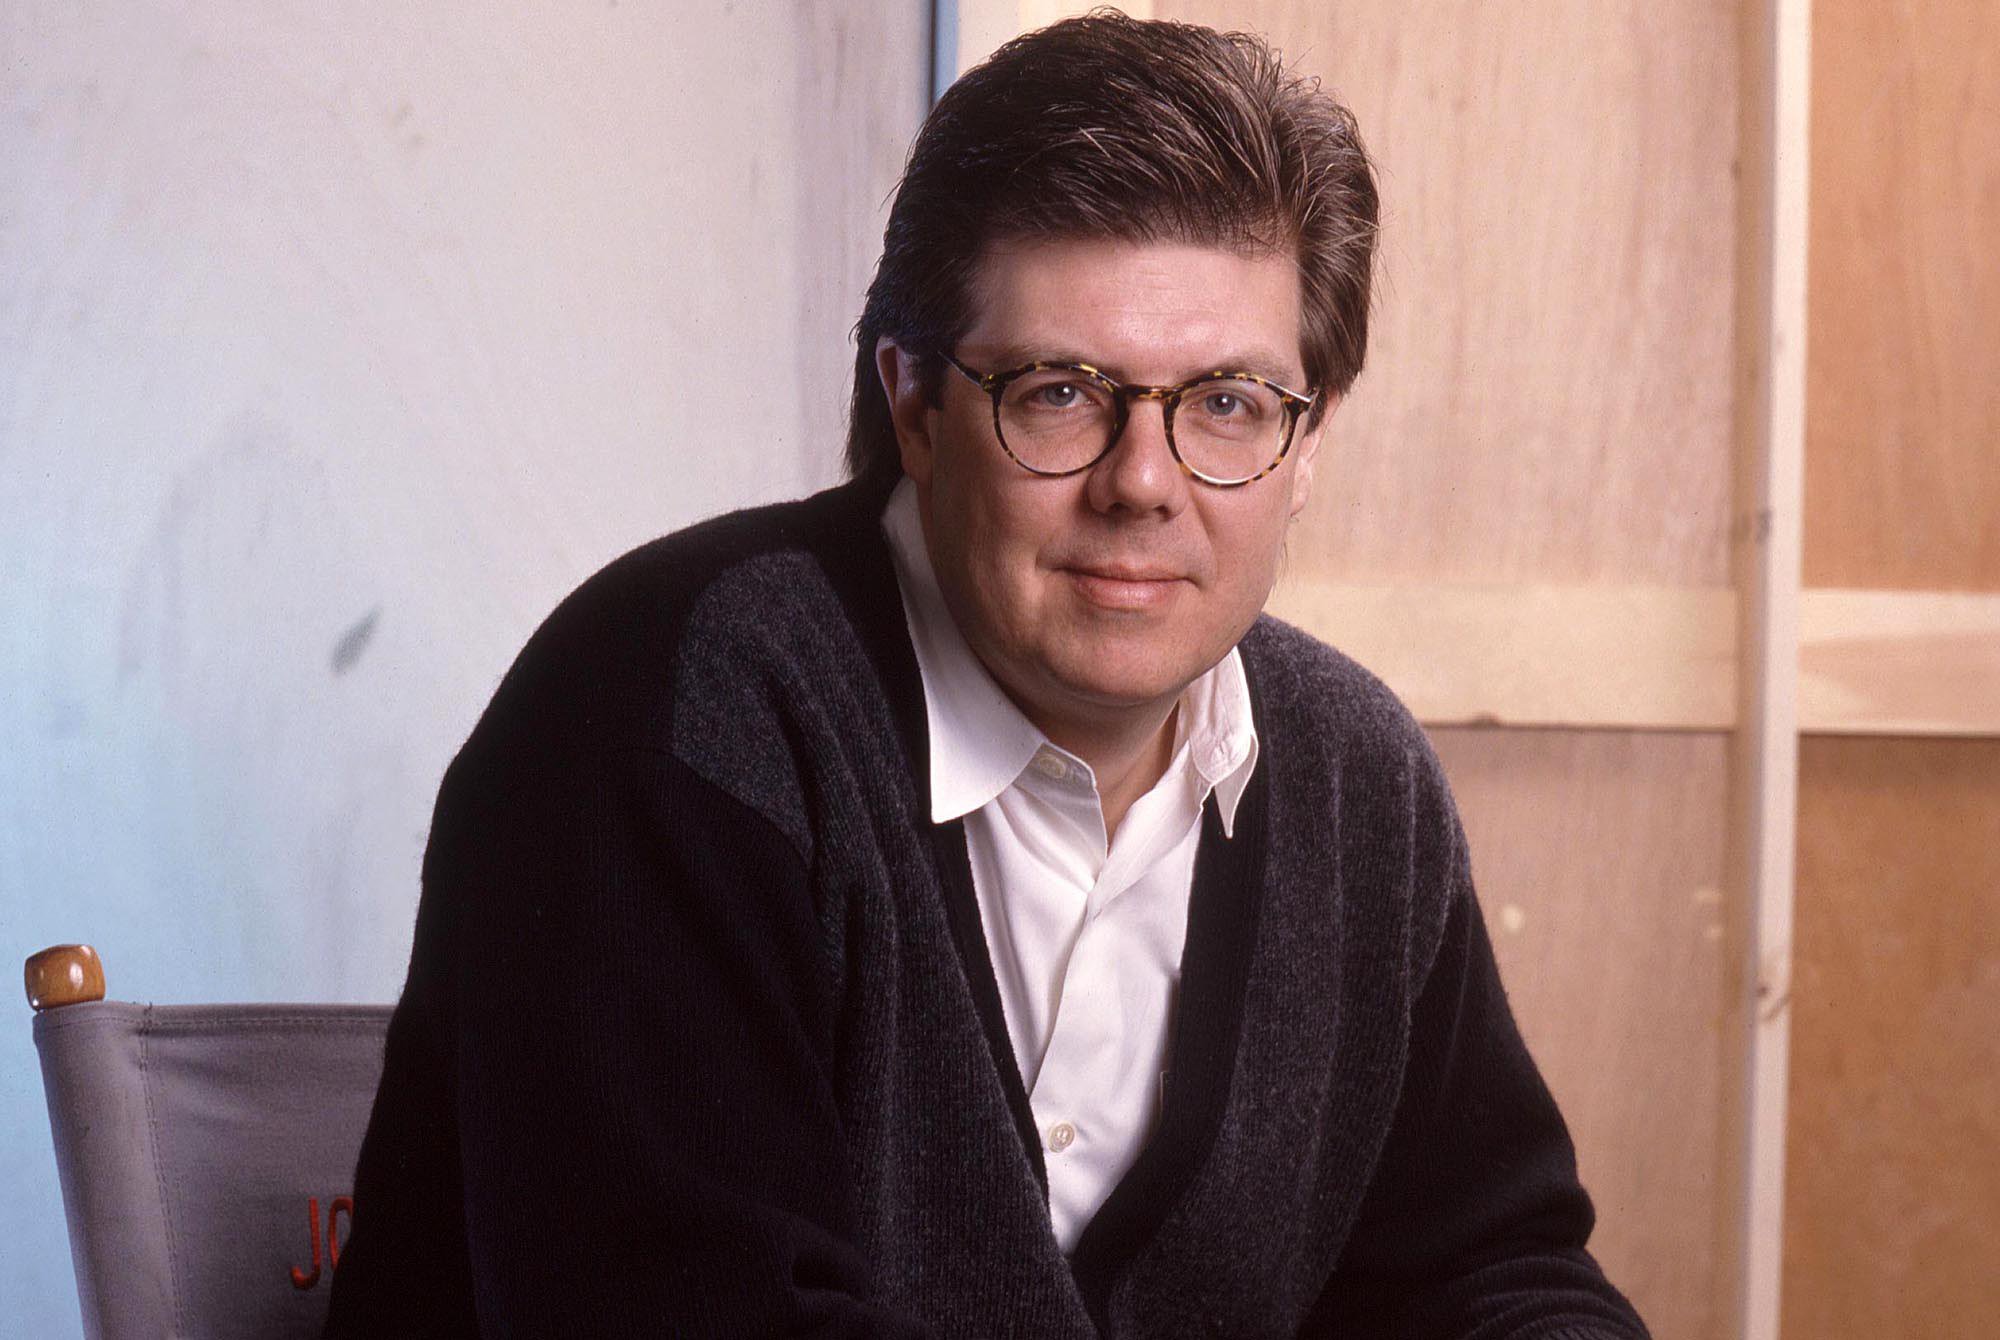 Happy Birthday to John Hughes, who would have turned 67 today! 